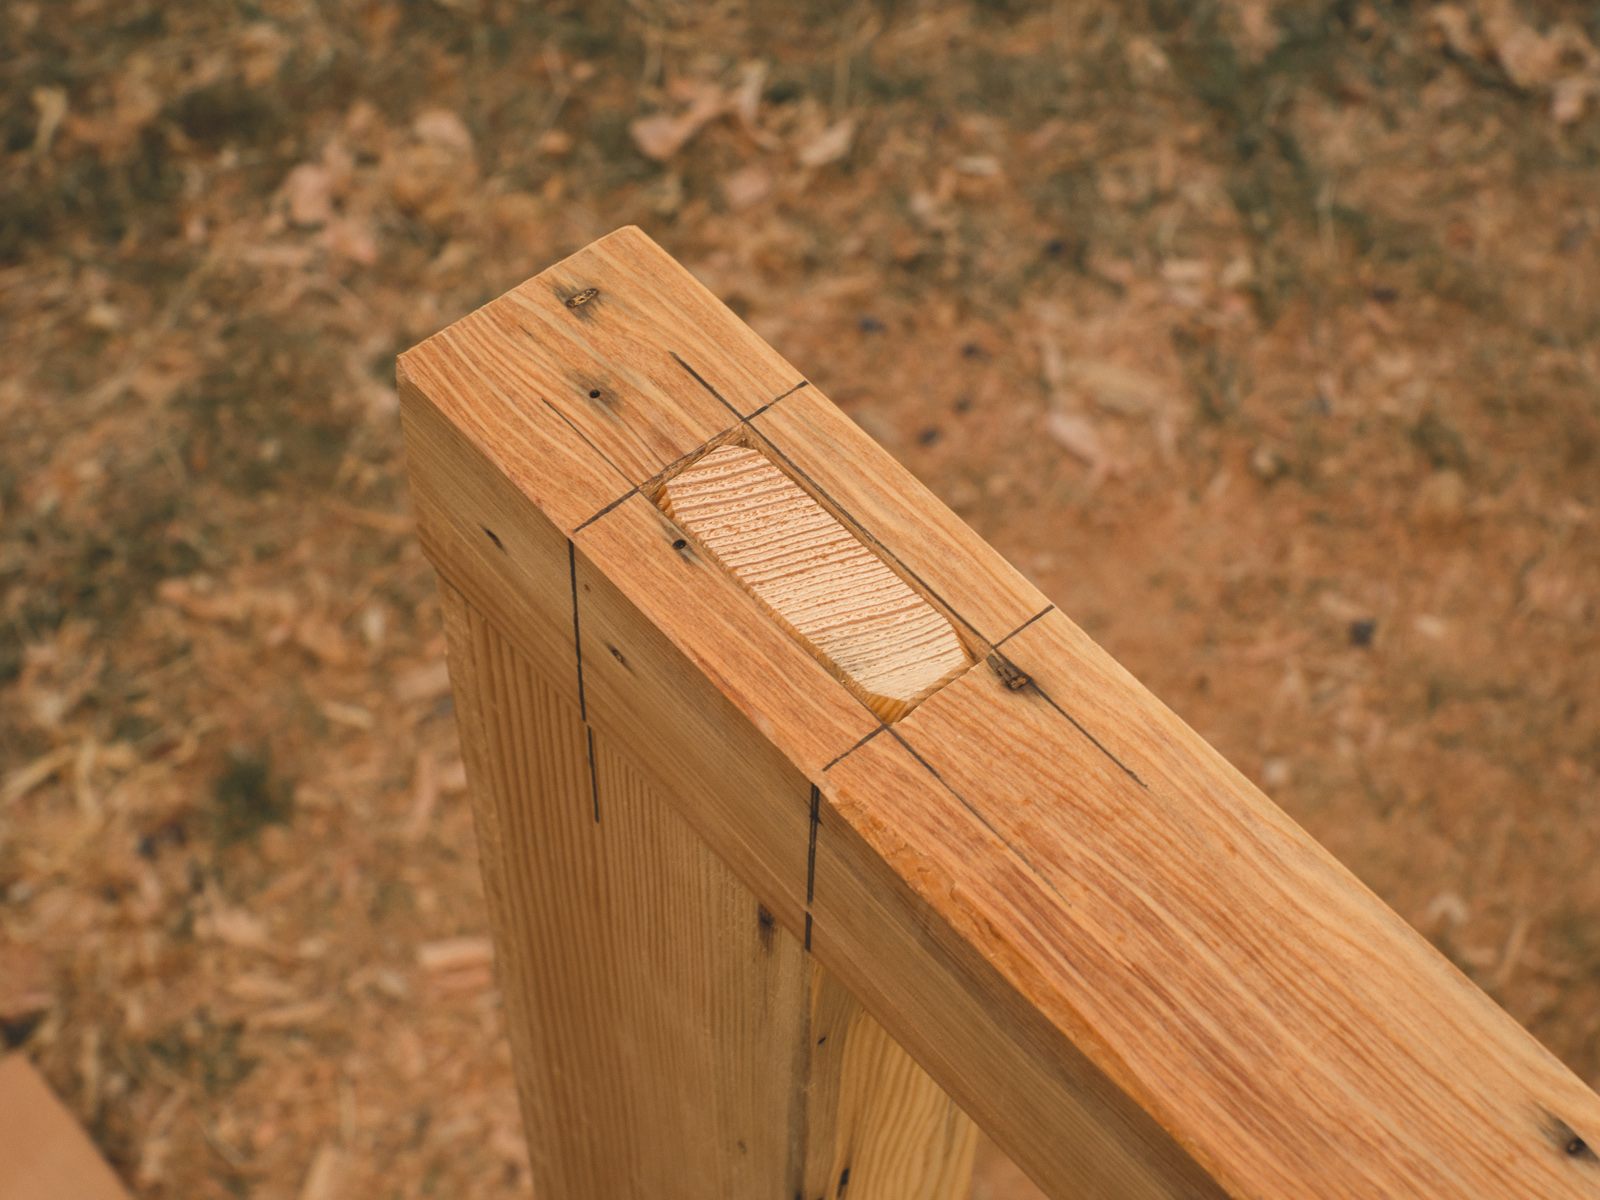 Simple Japanese structural joinery